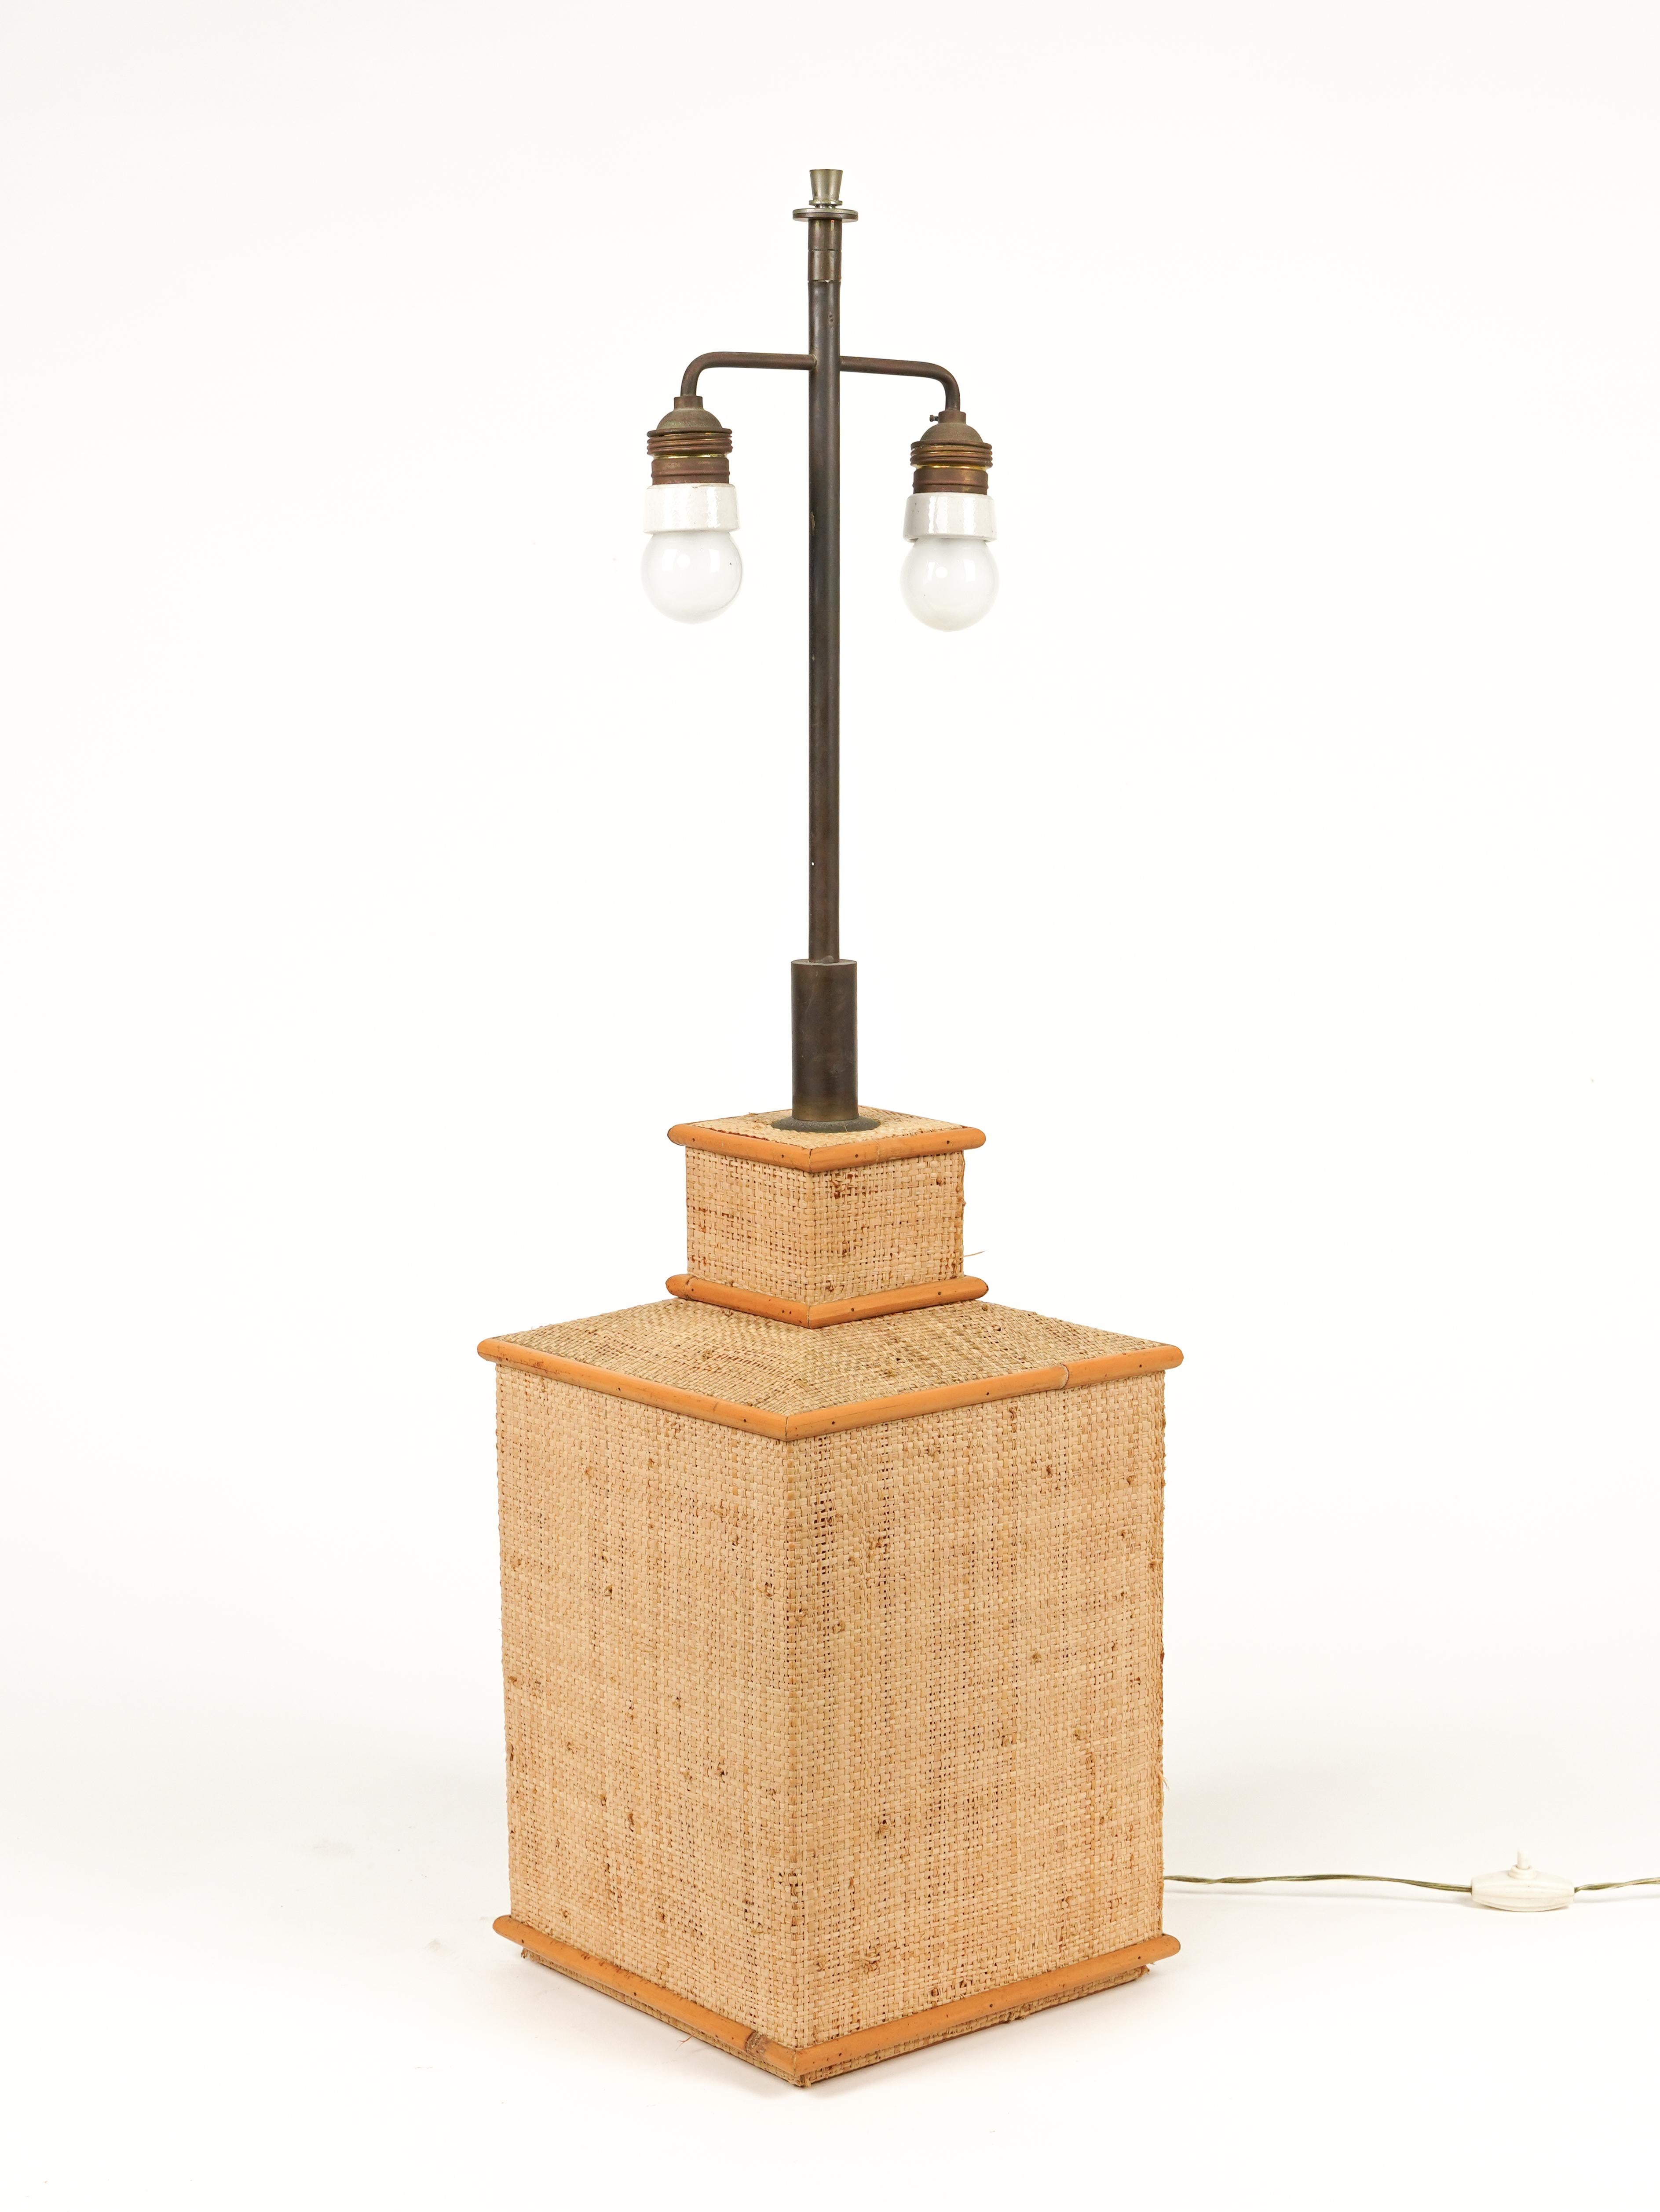 Midcentury Rattan, Wicker and Brass Table Lamp Vivai Del Sud Style, Italy 1960s For Sale 3